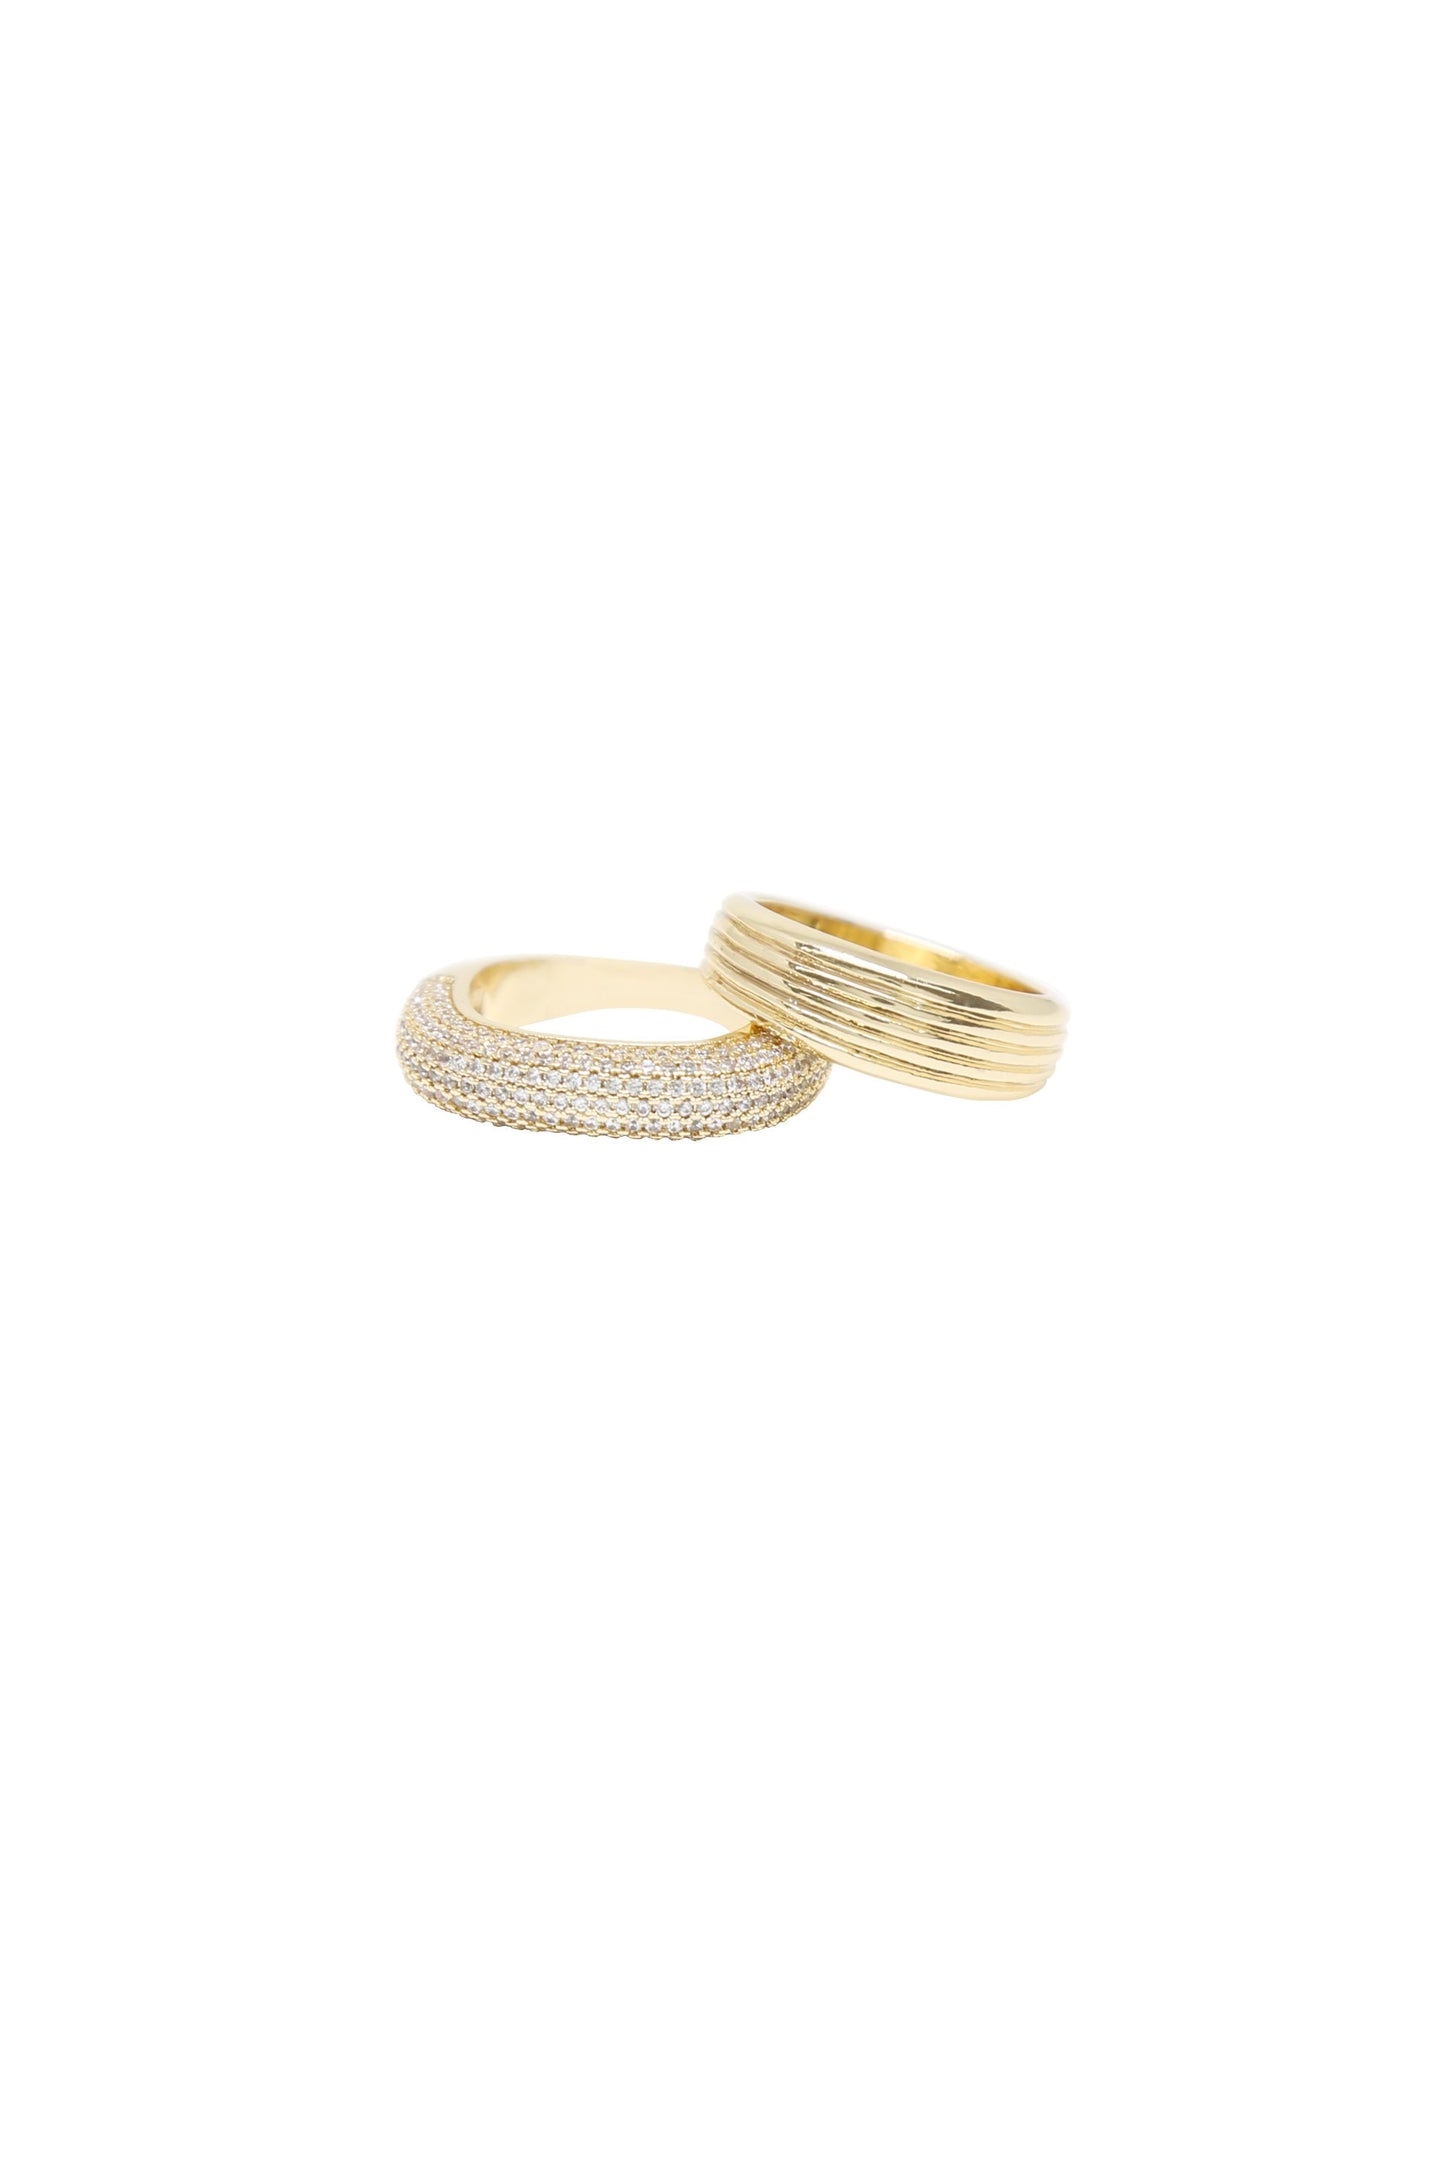 Thick Pave & Textured 18k Gold Plated Ring Band Set on white background  